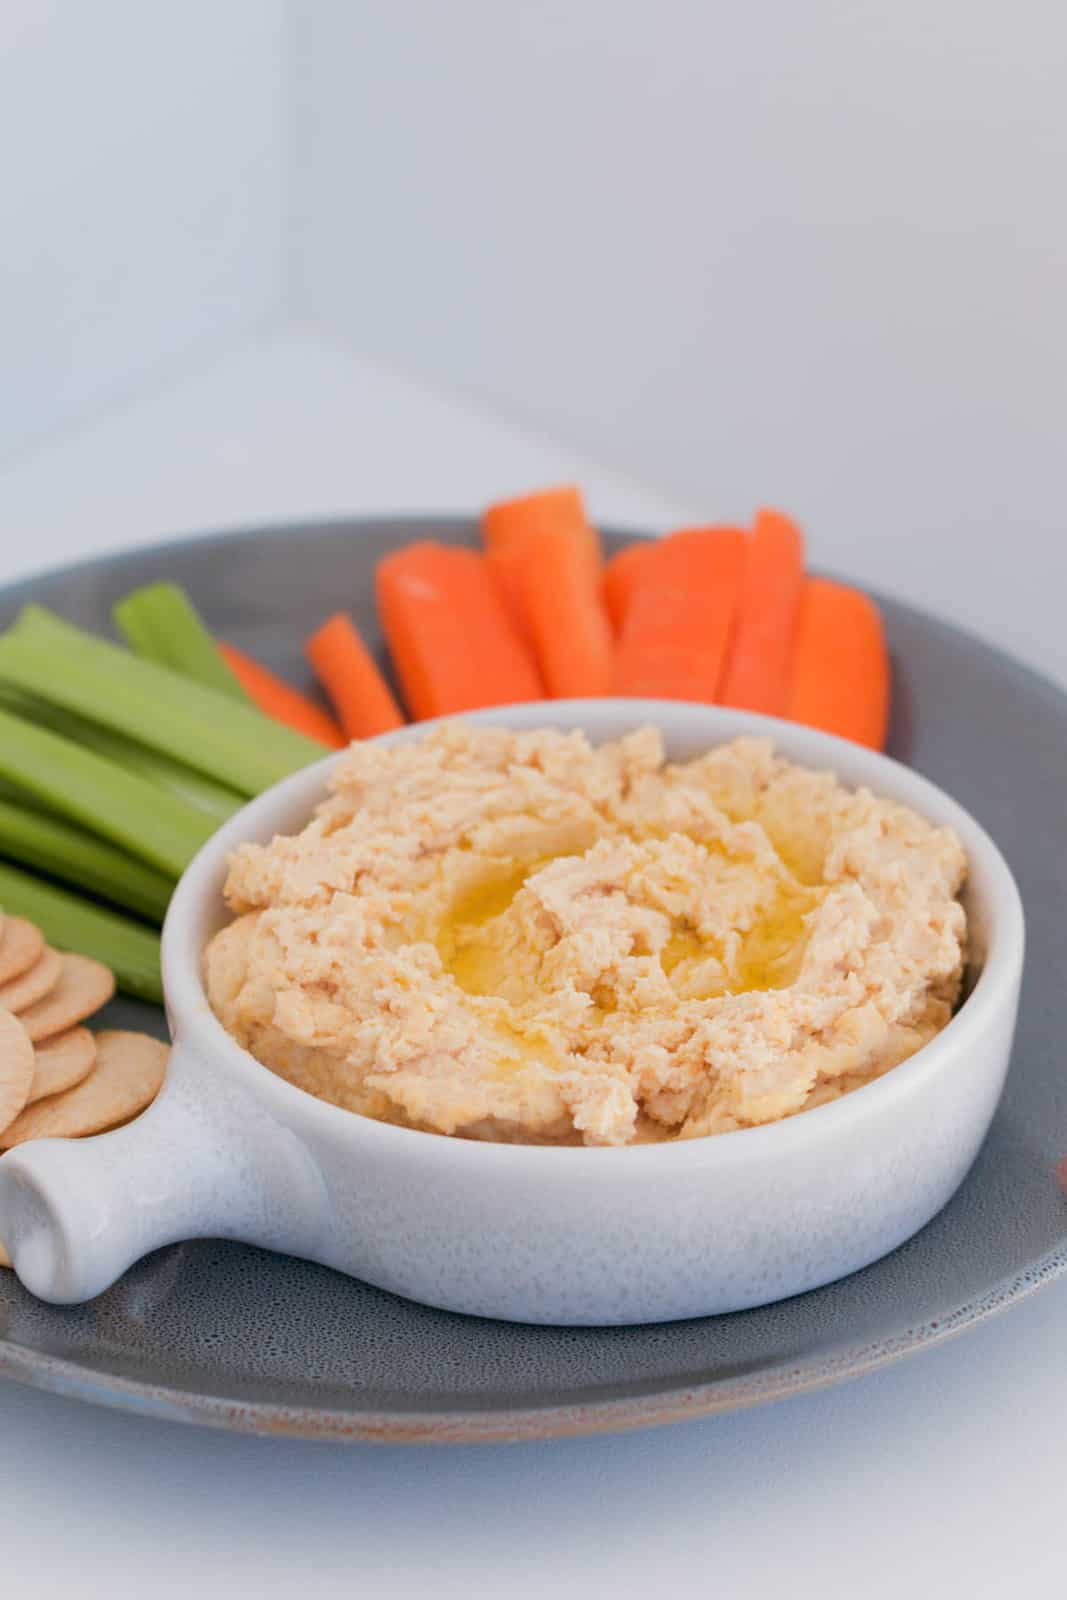 A bowl of Hummus Dip, drizzled with olive oil, served with carrot, celery and crackers